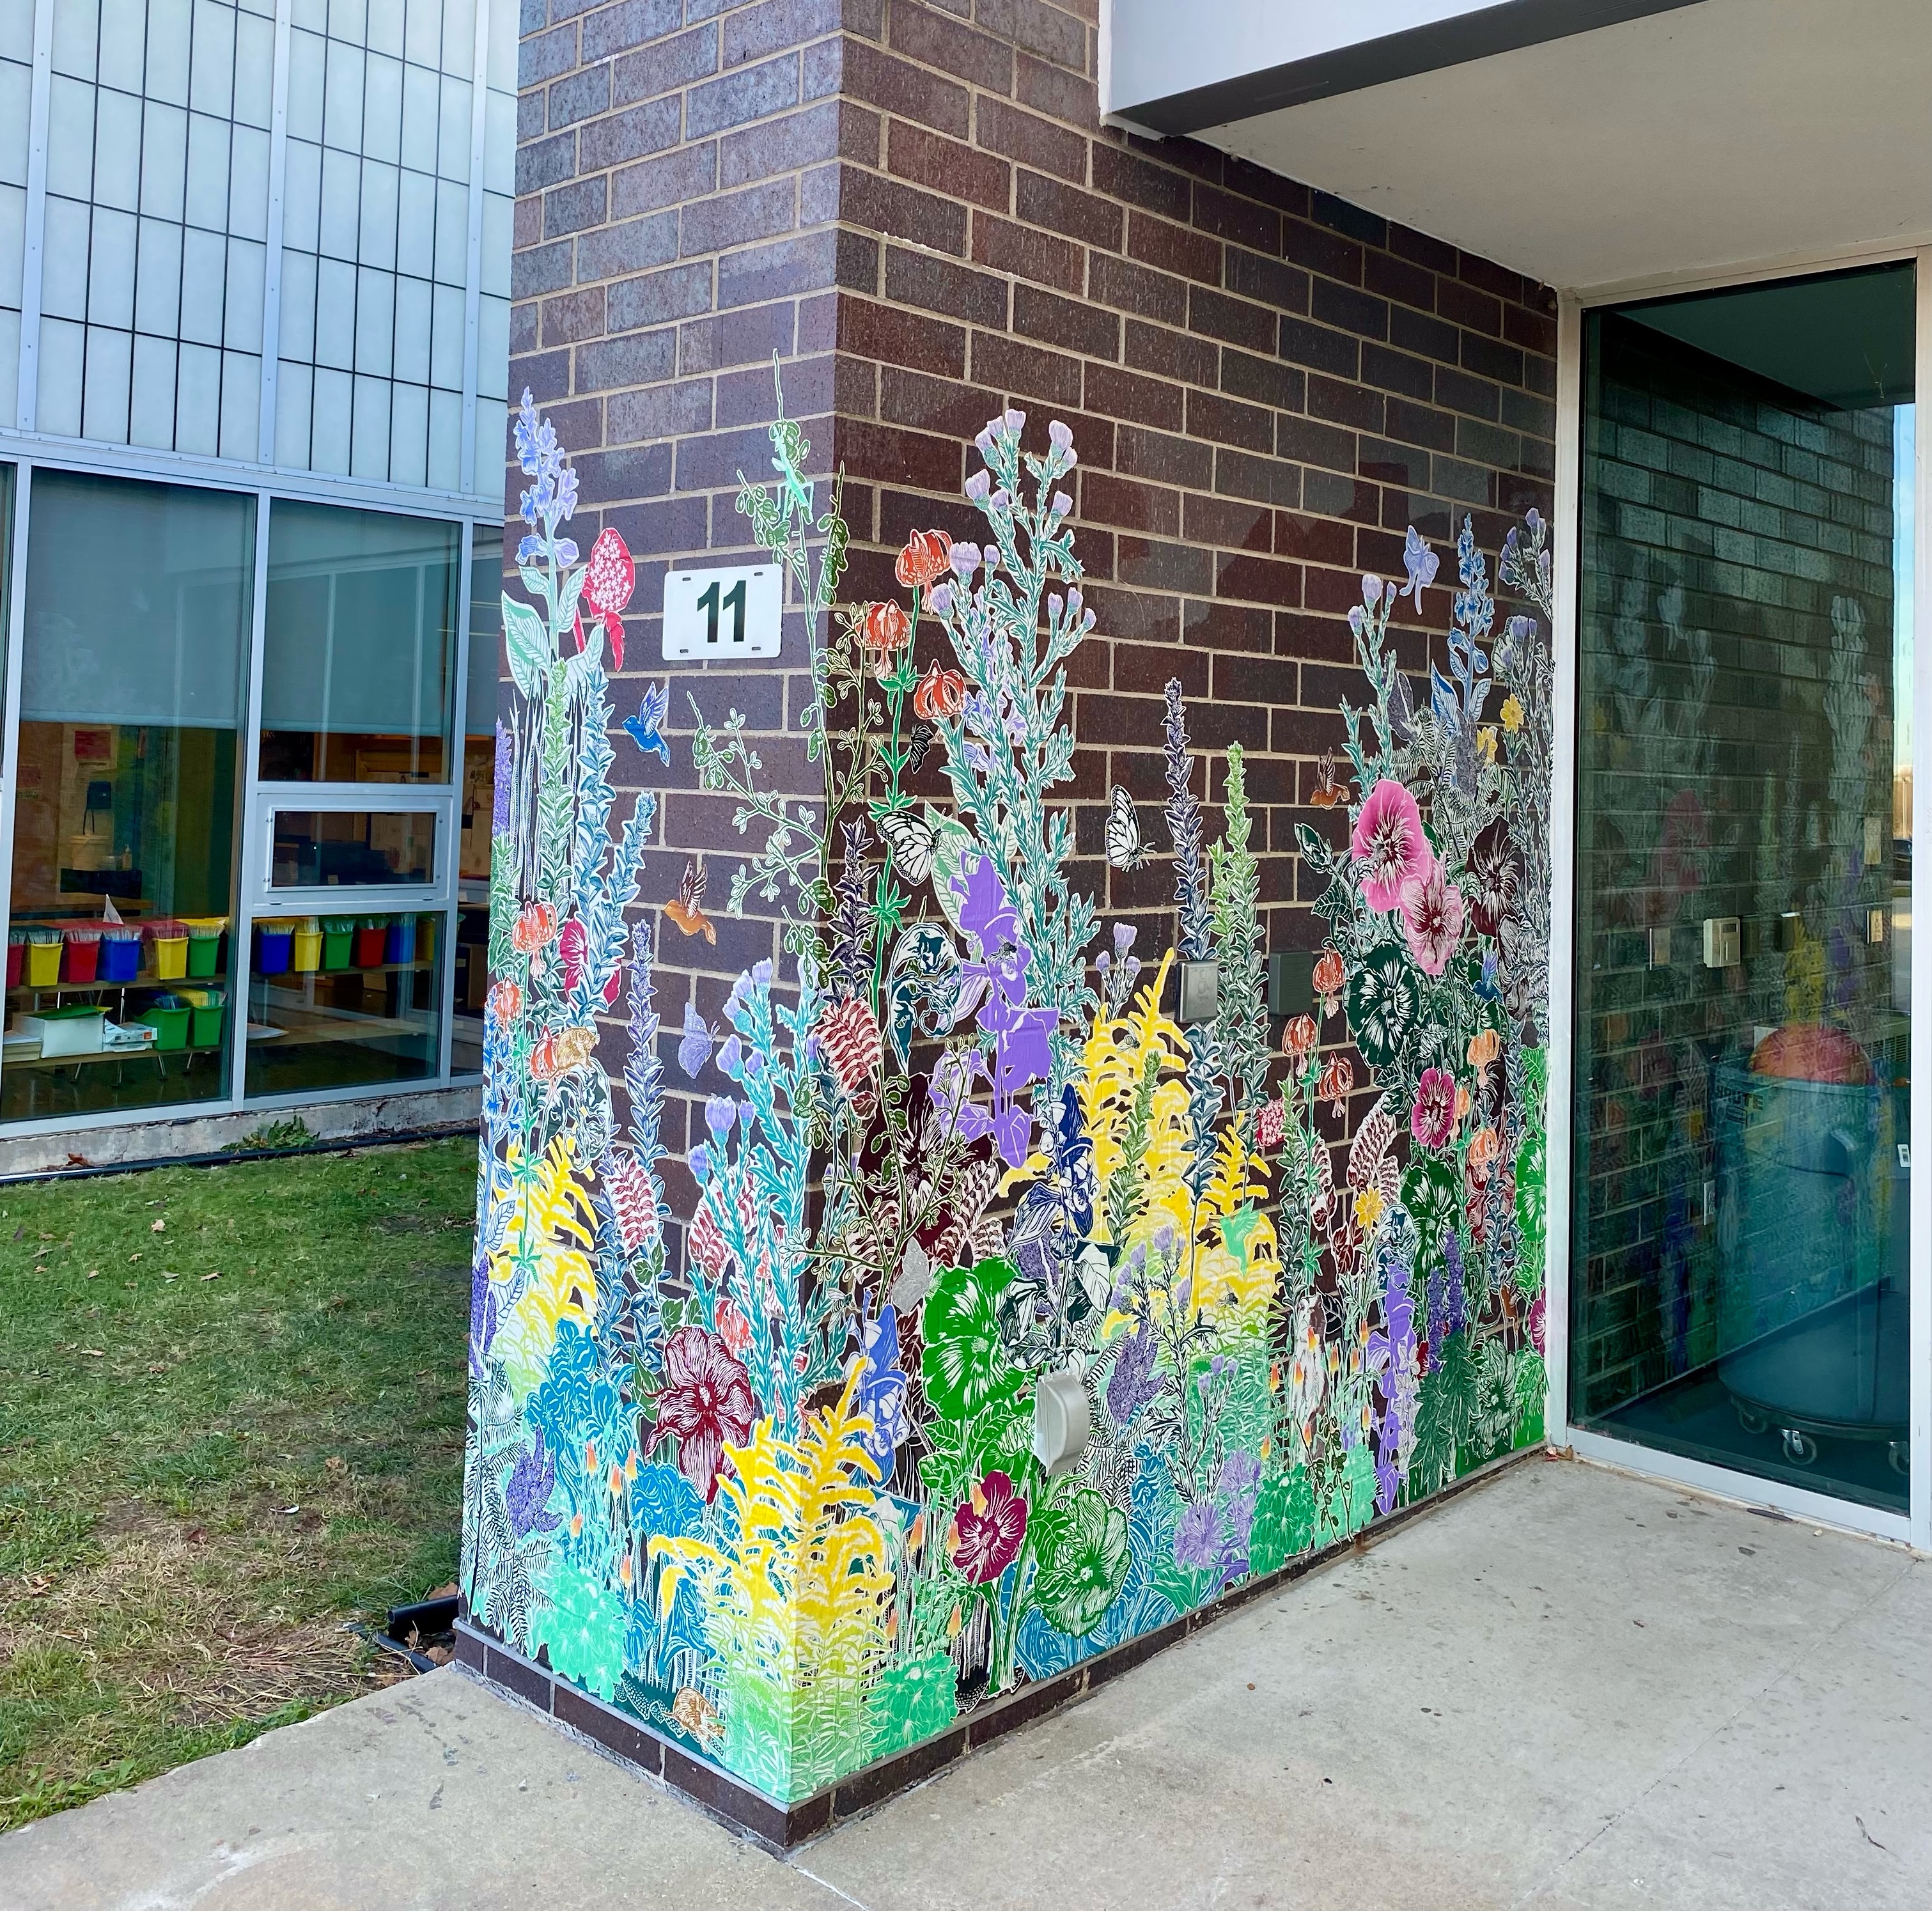 A colorful paste-up installation of various plants is on a brick wall at Carrie Busey Elementary school. The prinstallation wraps around the wall to the other side. Photo by Emmy Lingscheit.